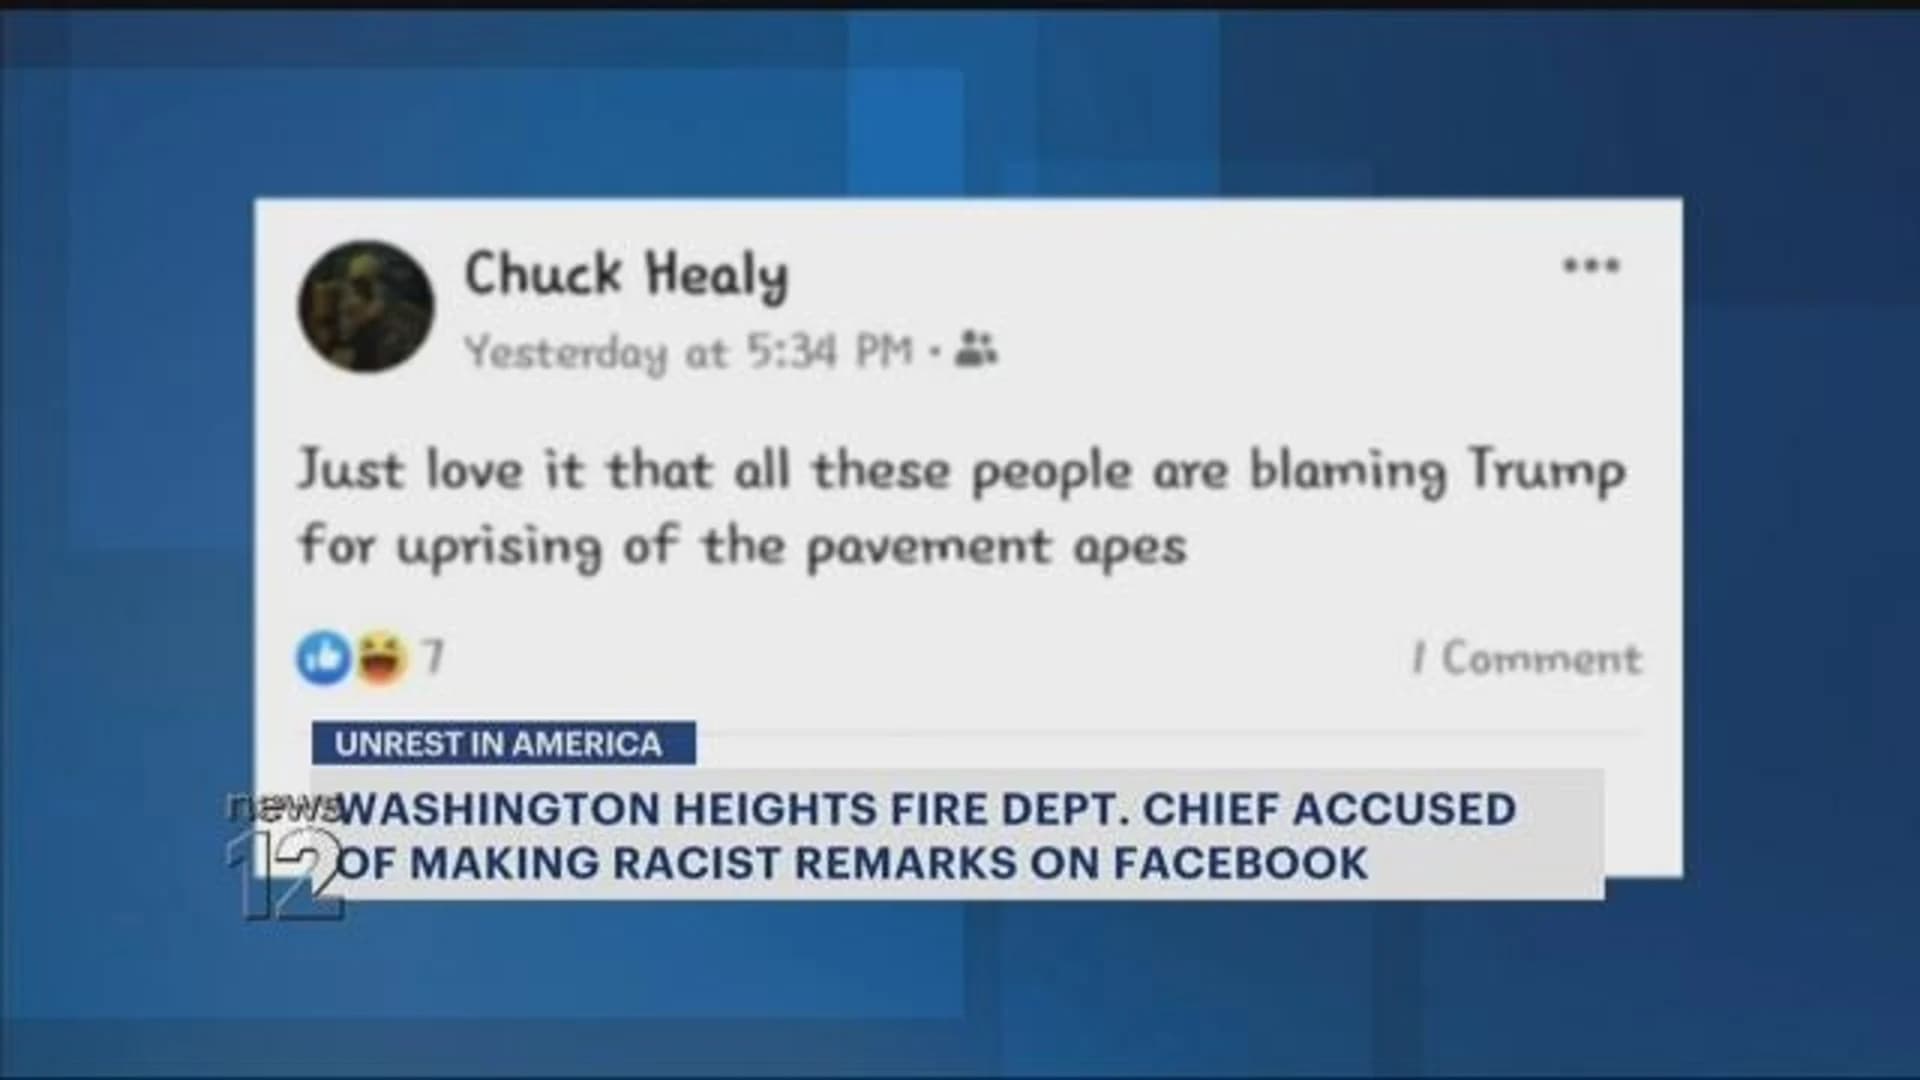 Fire chief accused of racist remarks relieved of duties